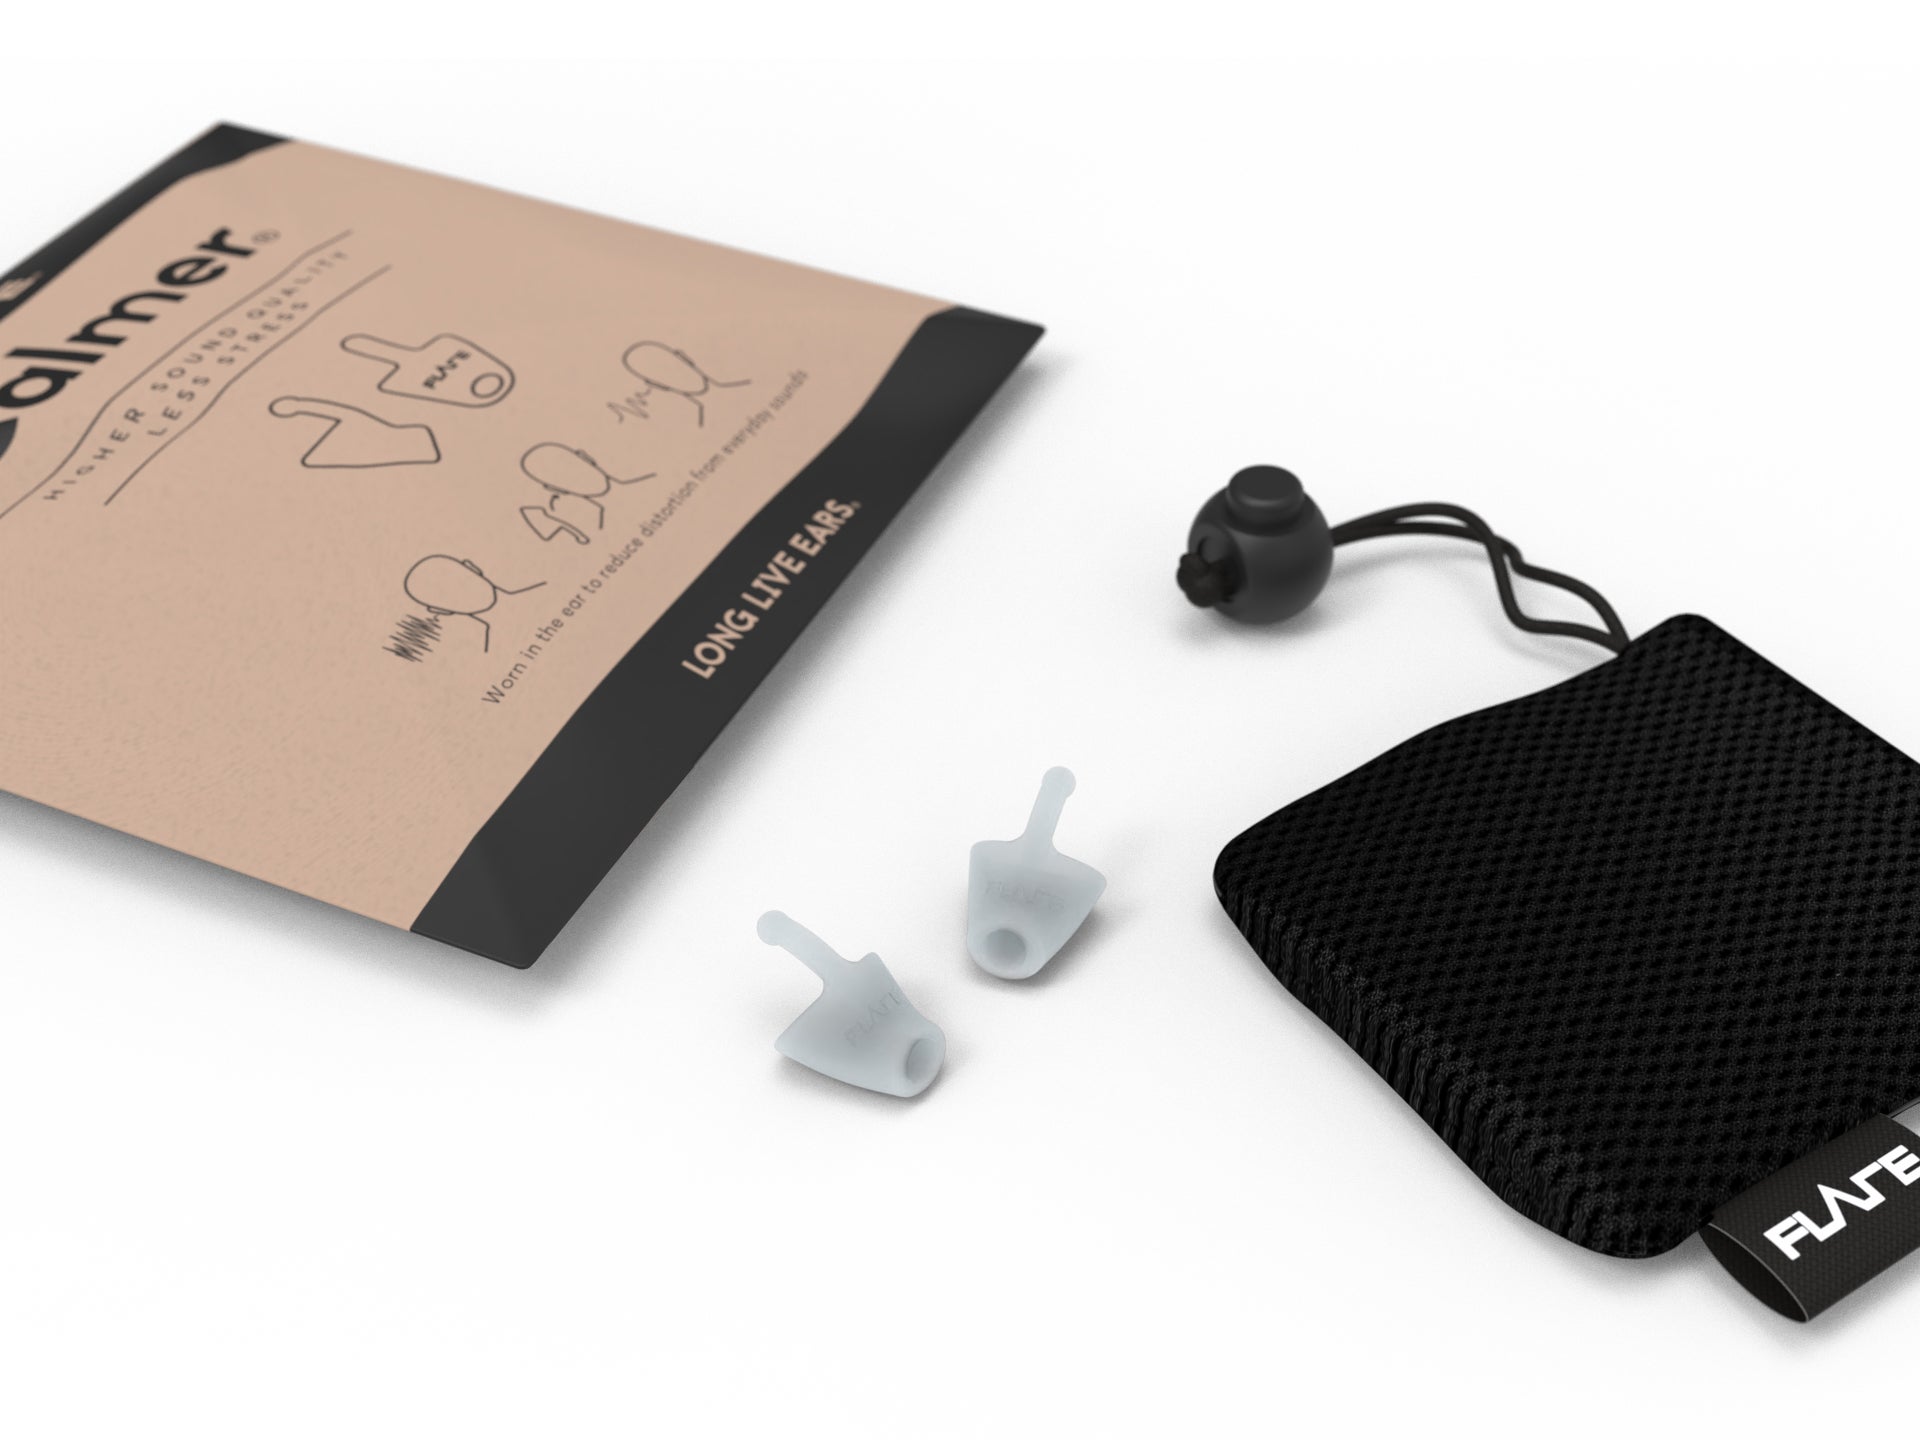 Flare Audio Calmer review: How to cancel ambient sound - Reviewed